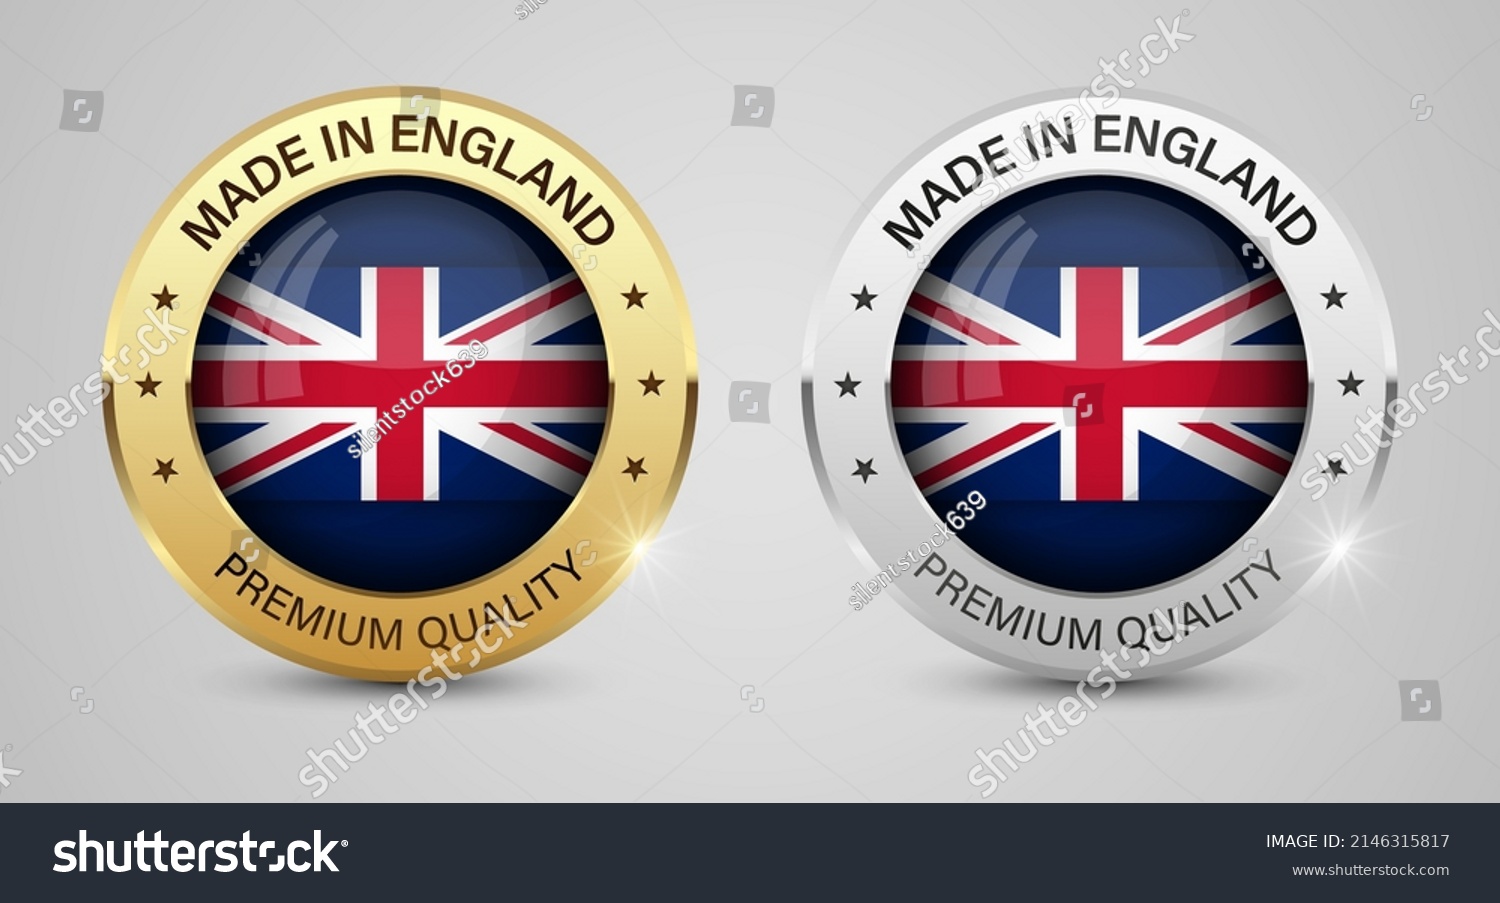 SVG of Made in England graphics and labels set. Some elements of impact for the use you want to make of it. svg